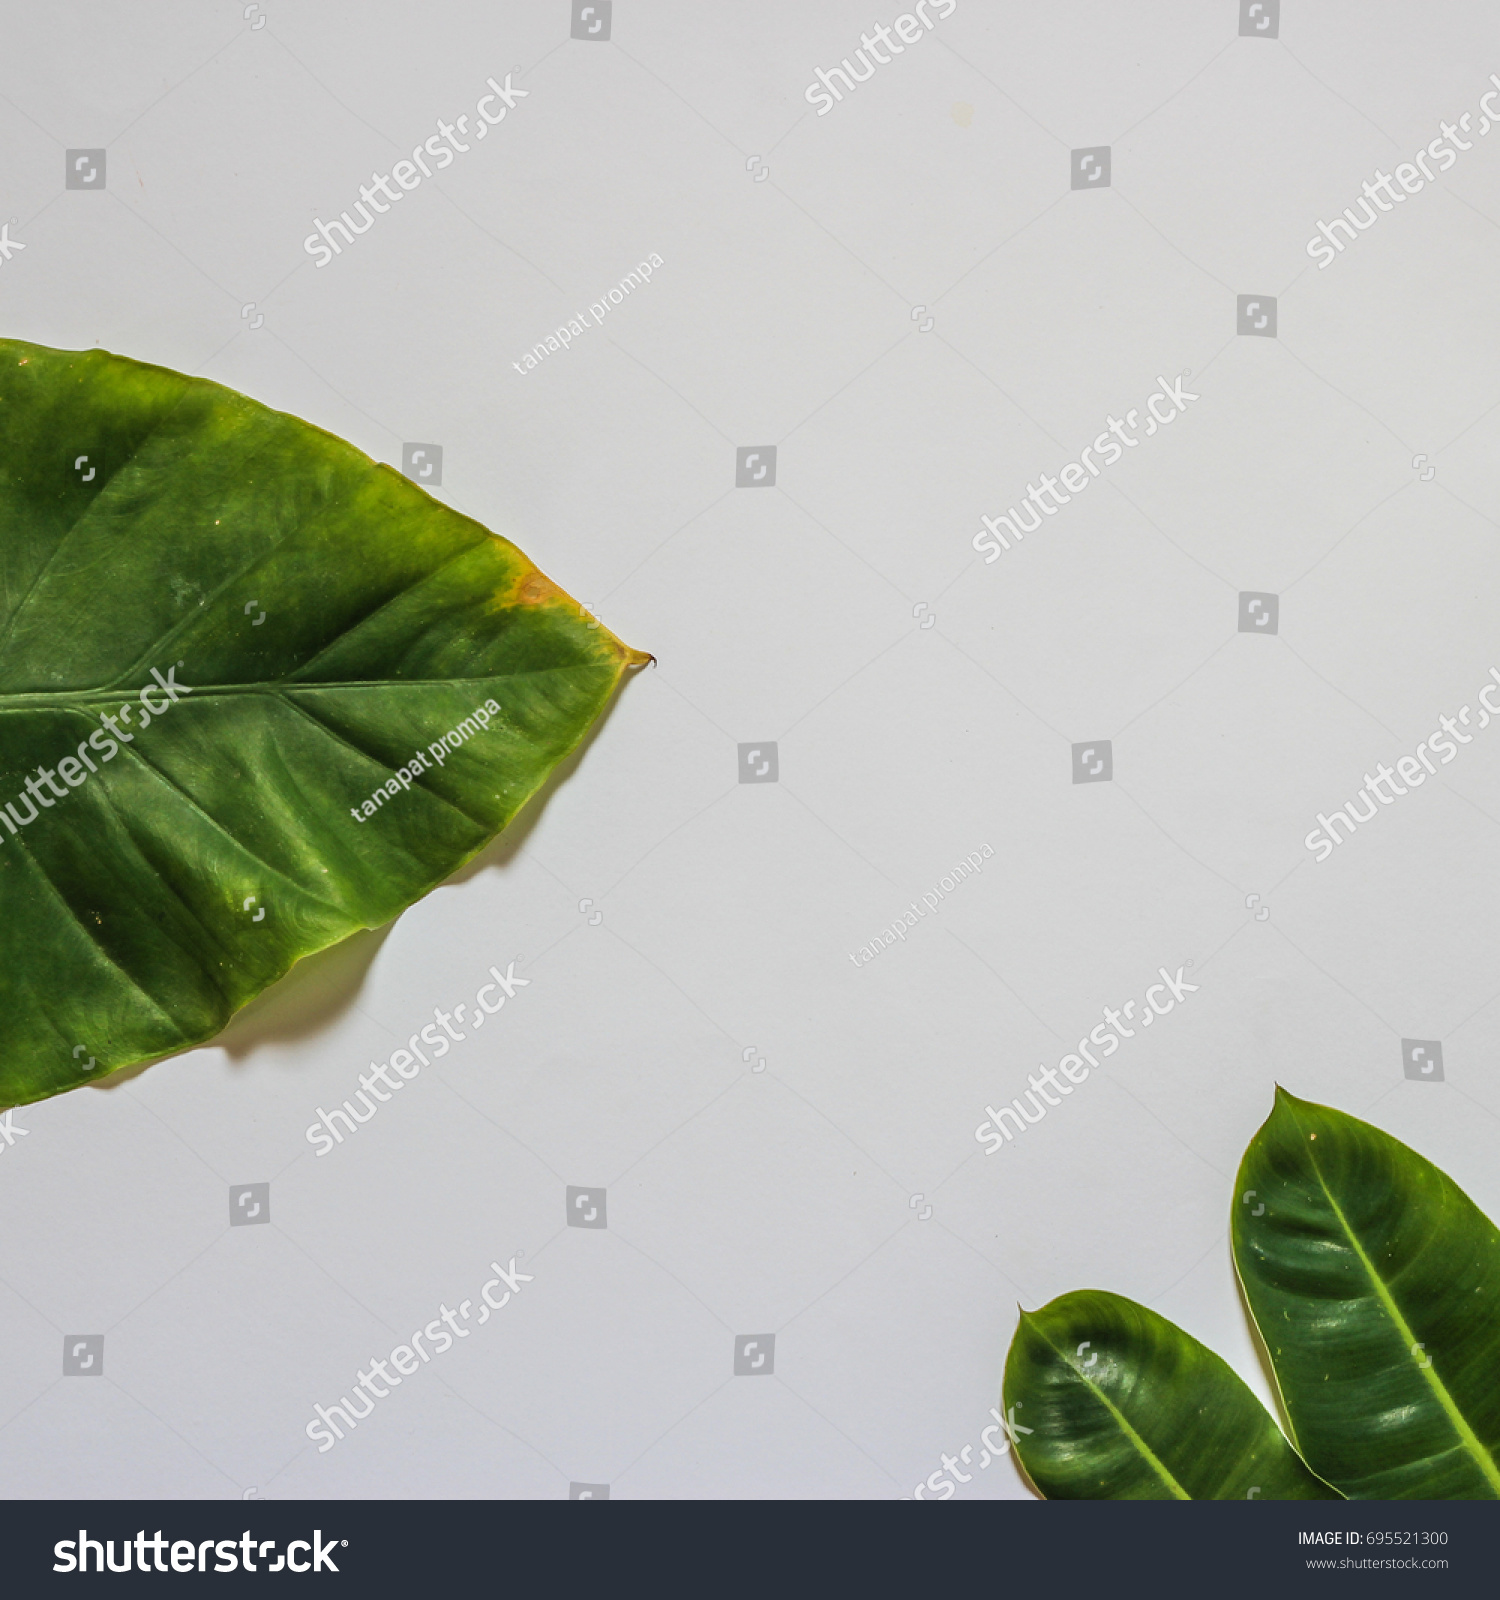 Creative nature layout made of tropical leaves and flowers. Flat lay. Summer concept. #695521300